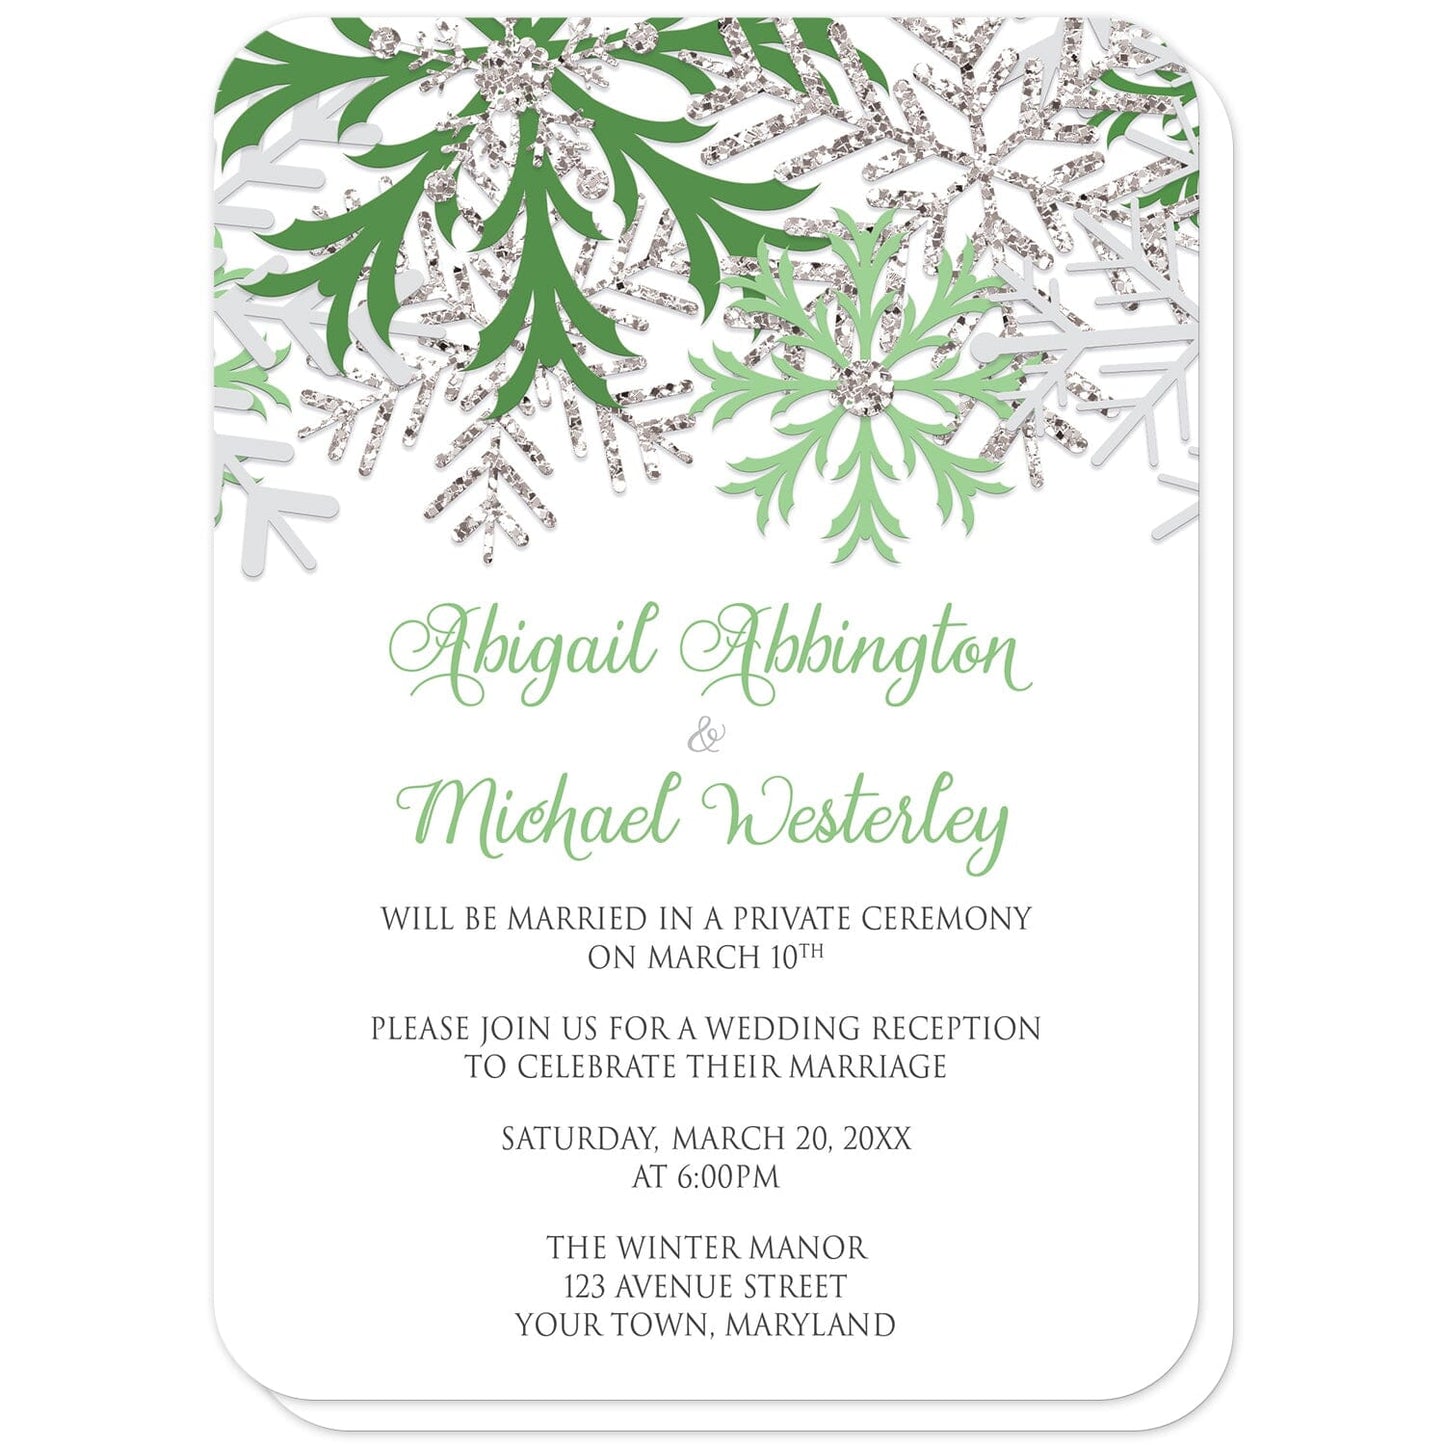 Winter Green Silver Snowflake Reception Only Invitations (with rounded corners) at Artistically Invited. Beautiful winter green silver snowflake reception only invitations designed with green, light green, silver-colored glitter-illustrated, and light gray snowflakes along the top over a white background. Your personalized post-wedding reception details are custom printed in green and gray below the pretty snowflakes.